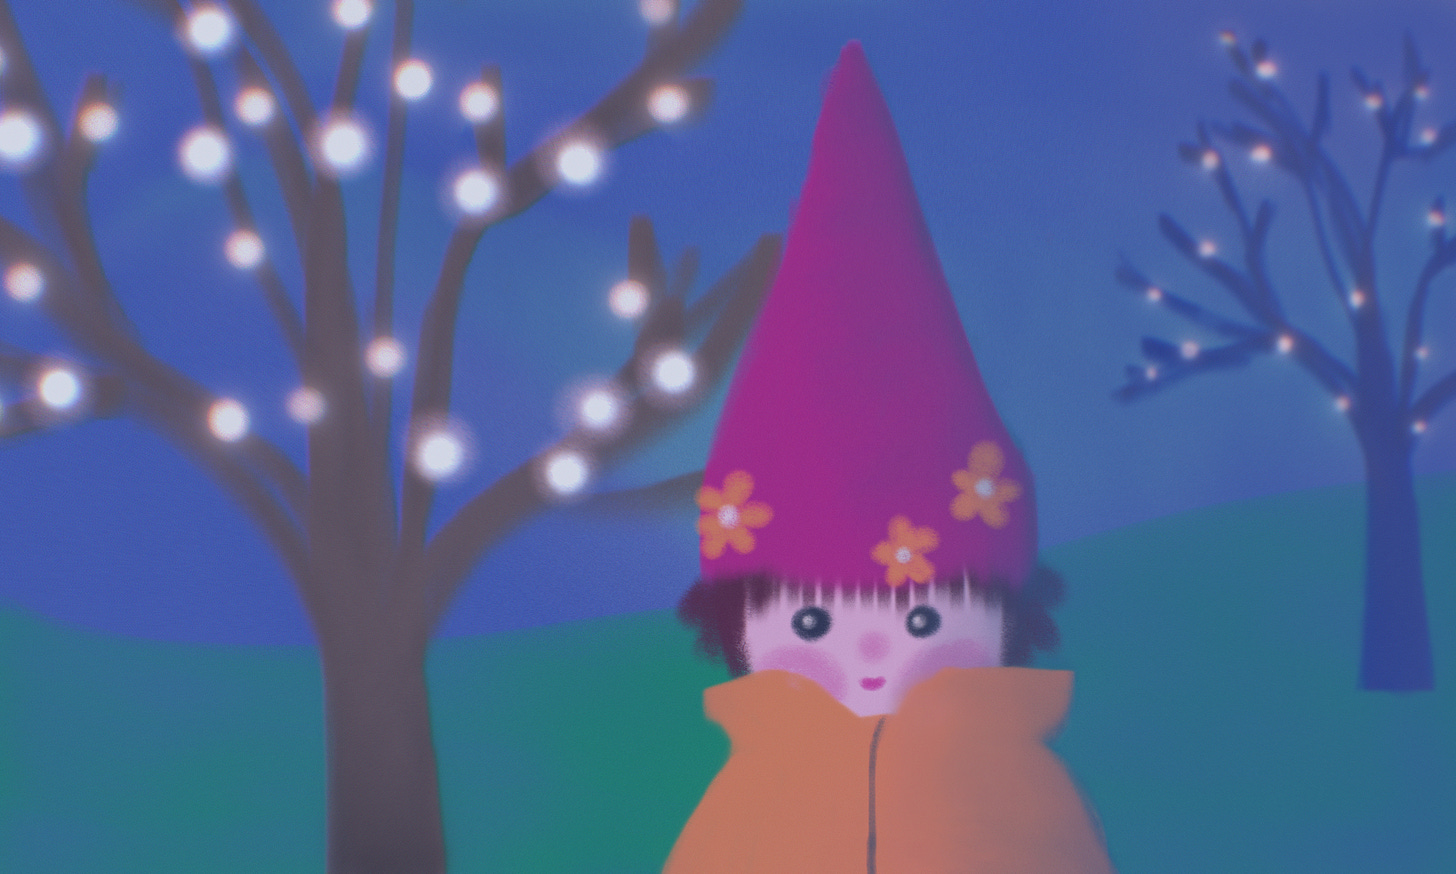 Illustration of an outdoor nighttime scene. A small child in a yellow coat and red gnome cap is smiling at a lighted, bare-branched tree. A similar tree is visible in the background. 